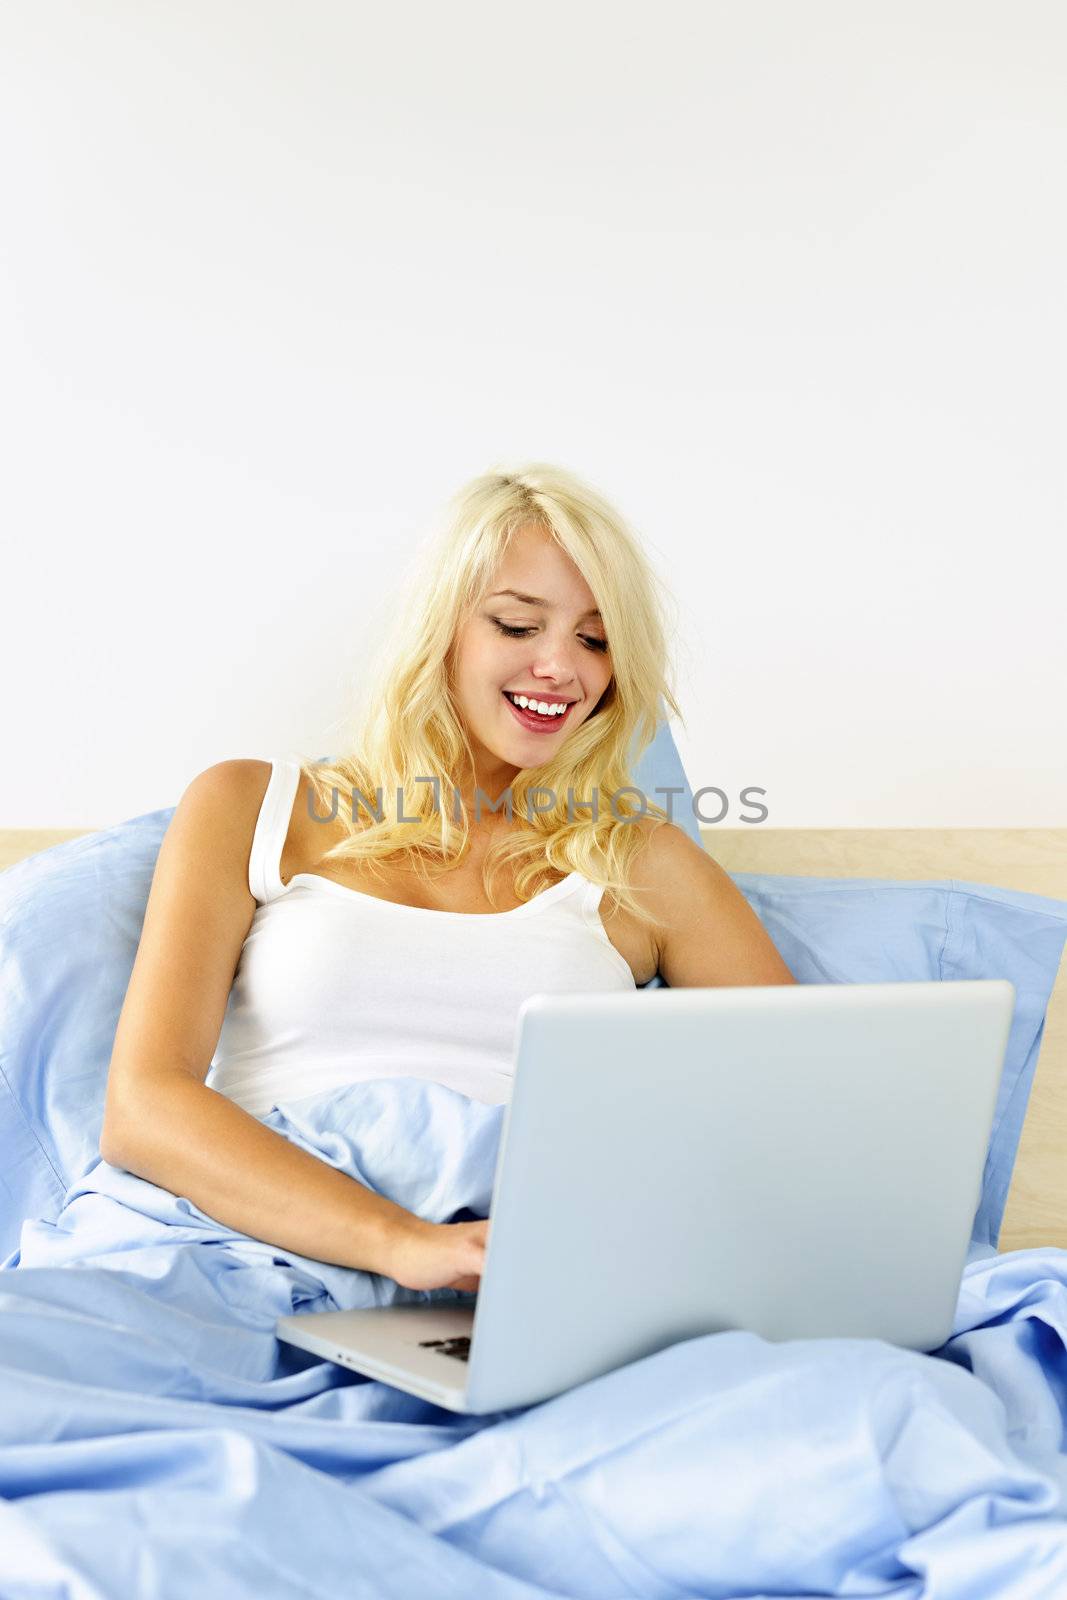 Smiling blonde woman using laptop computer at home sitting in bed